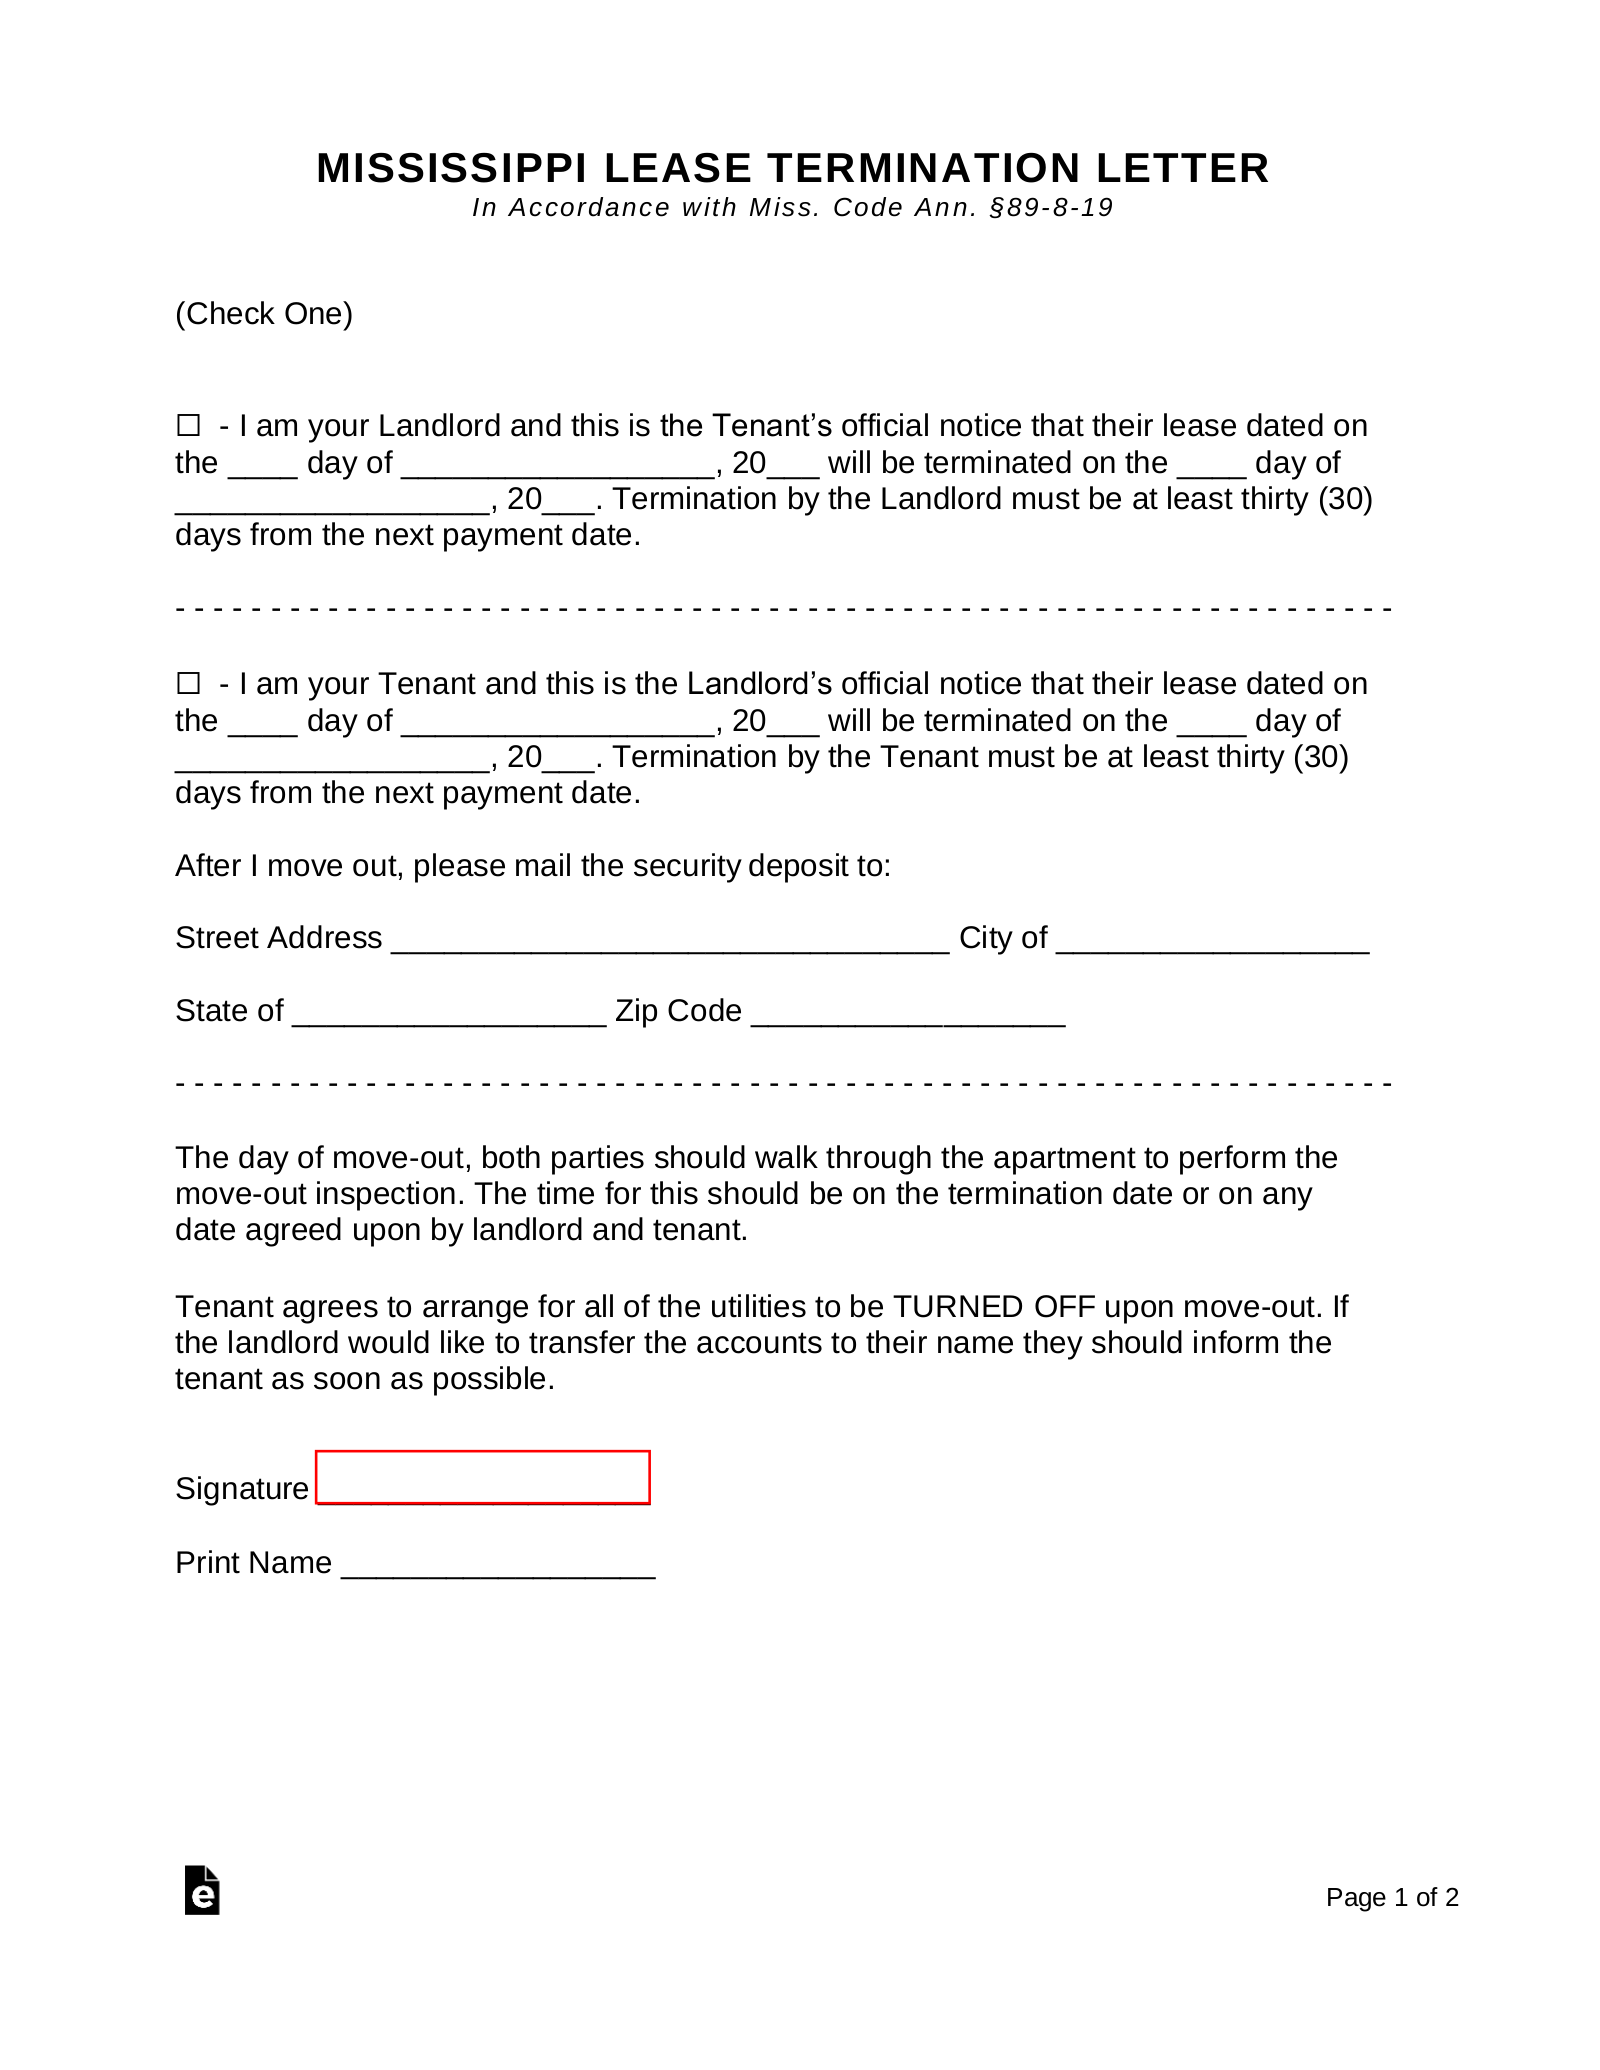 Mississippi Lease Termination Letter Form | 30-Day Notice